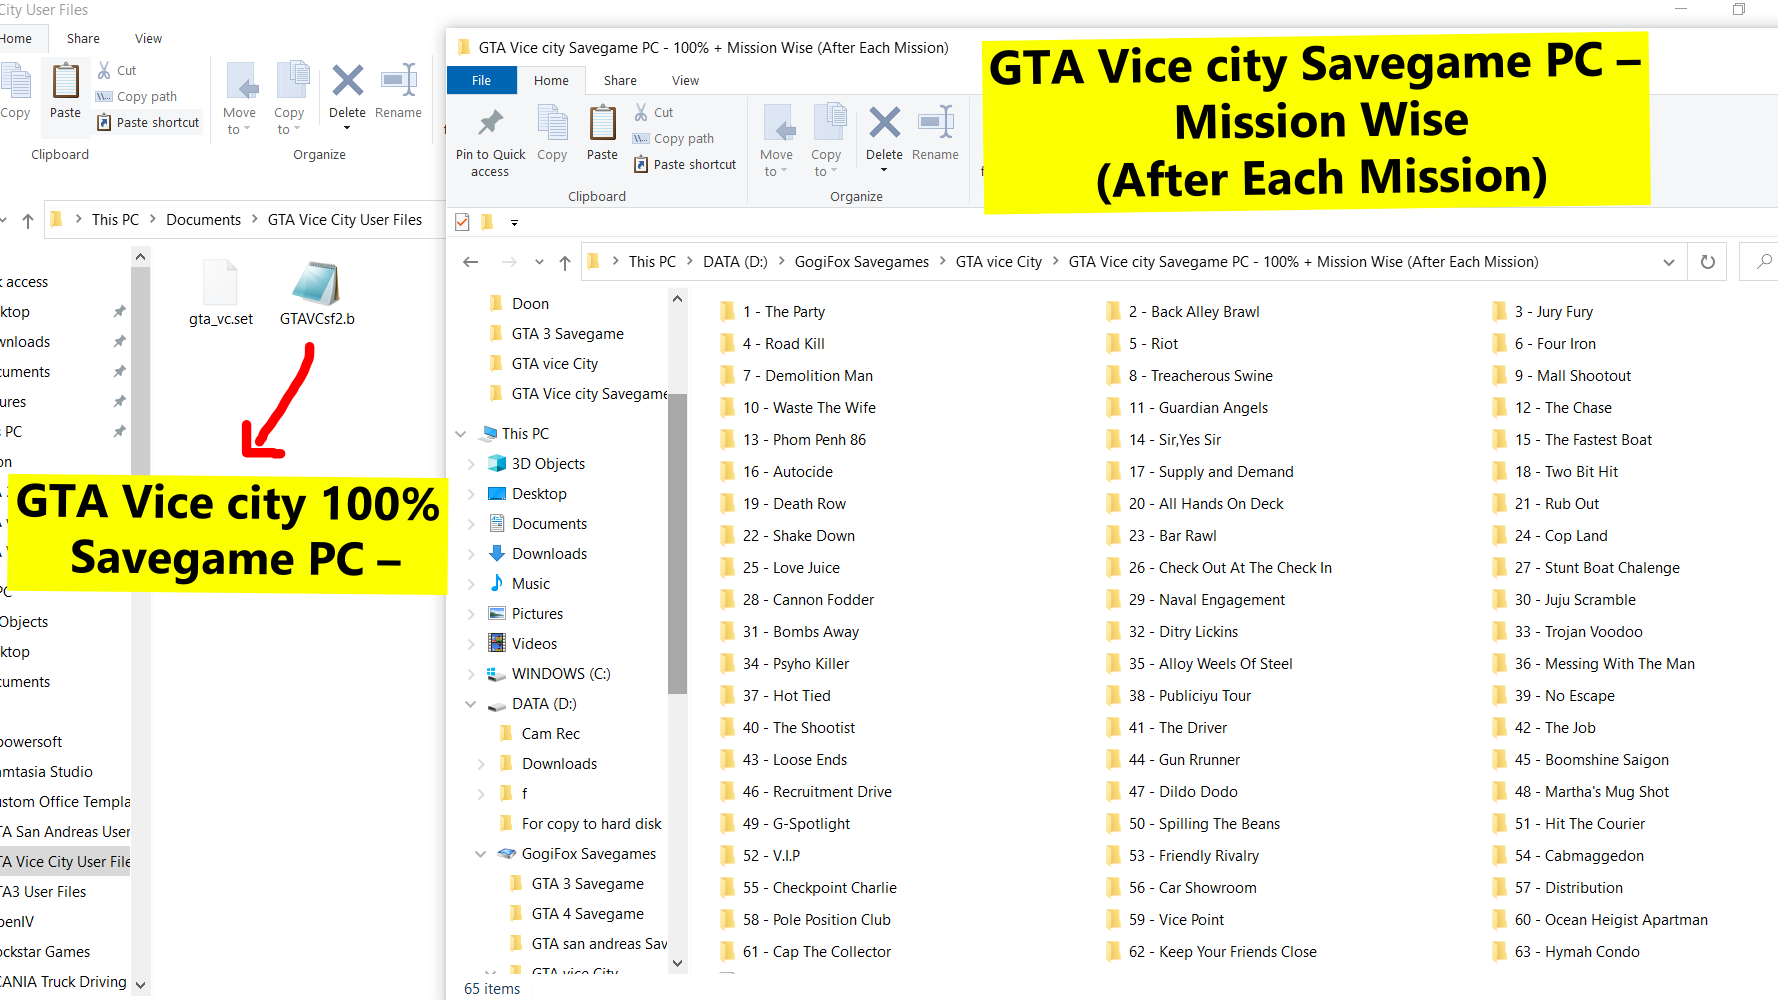 GTA Vice city Savegame PC - 100% + Mission Wise (After Each Mission)